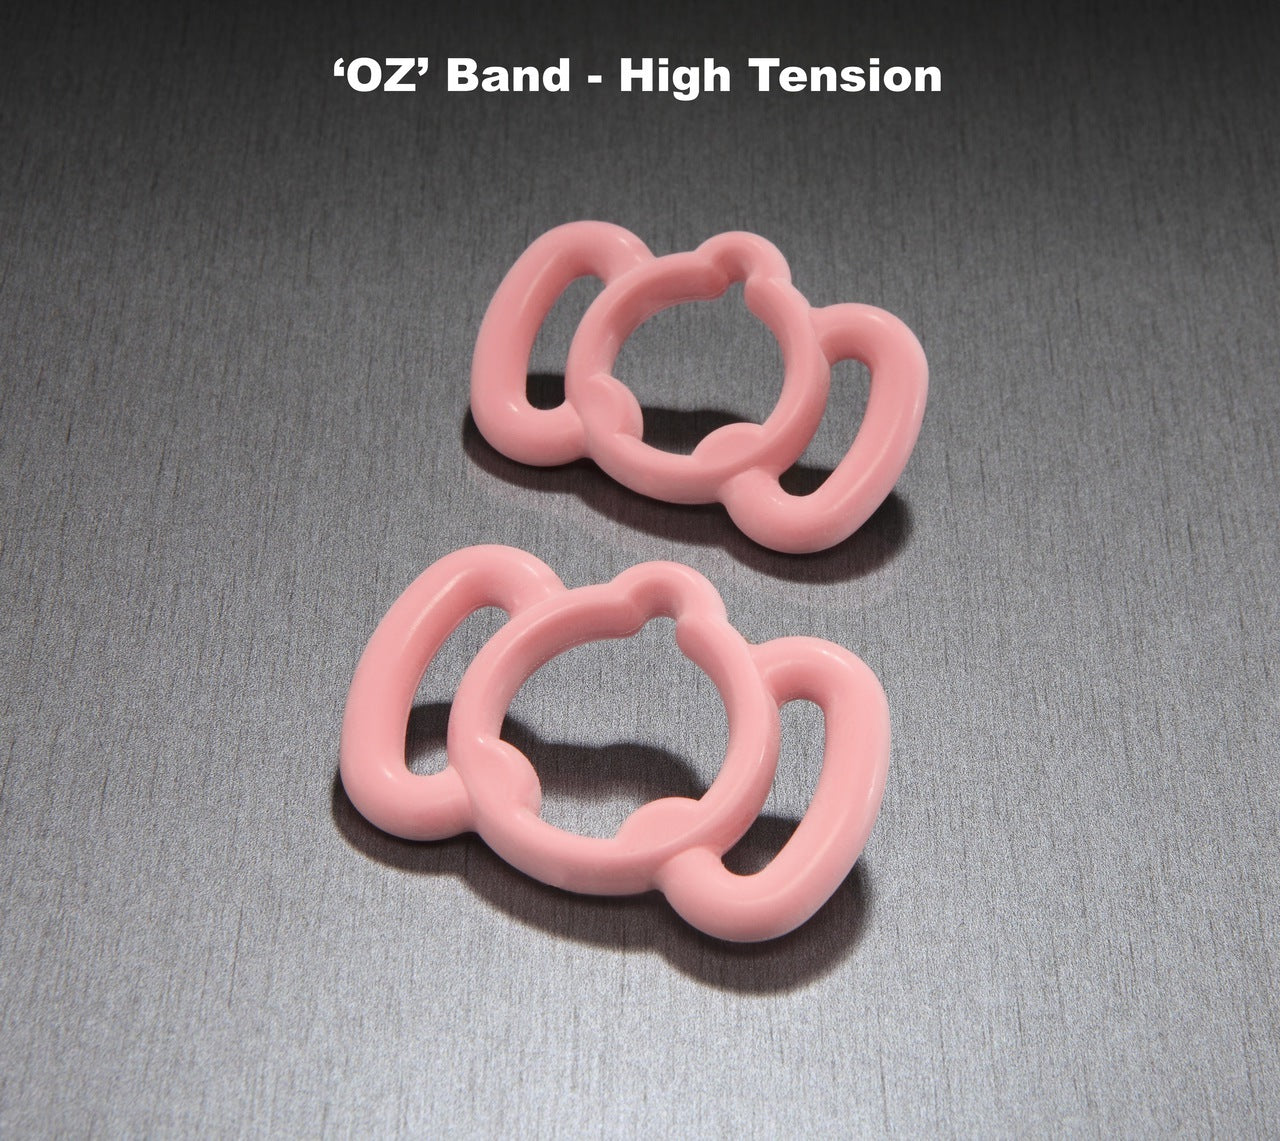 The 'OZ' Band from Pos-T-Vac | Set of 2 Bands